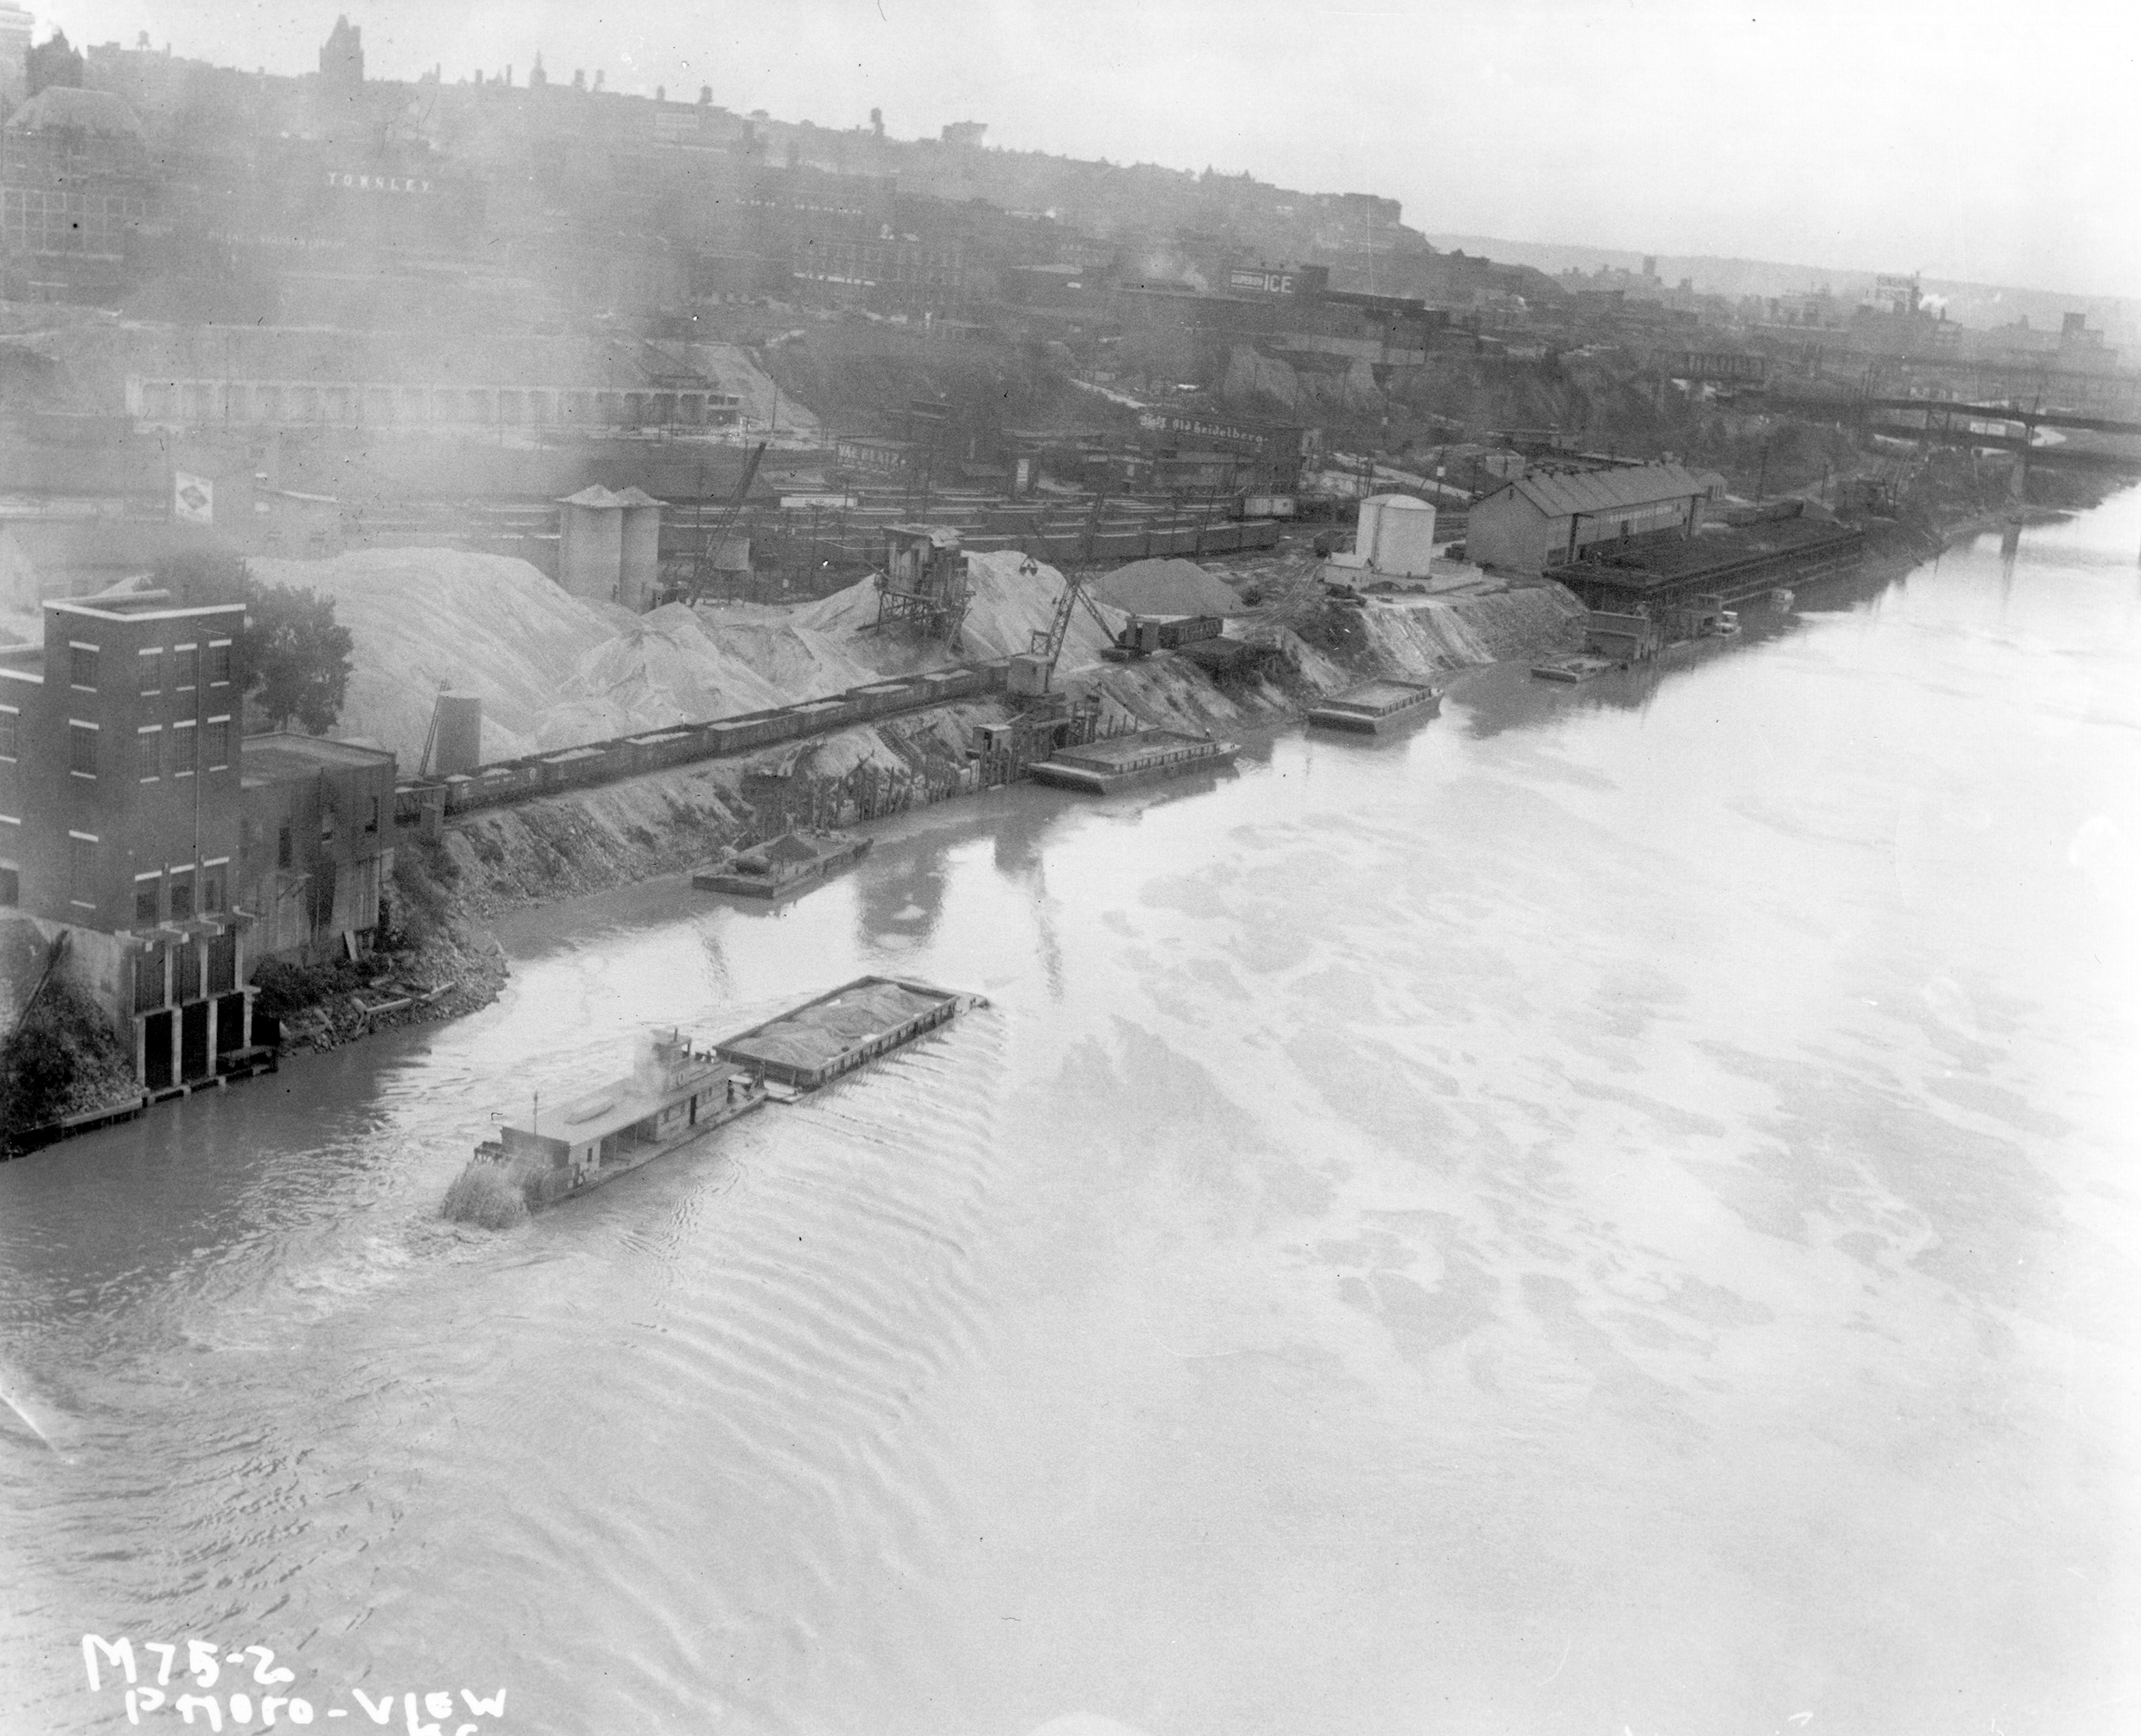 Riverfront area showing sand dredging operations, 1930. KANSAS CITY PUBLIC LIBRARY